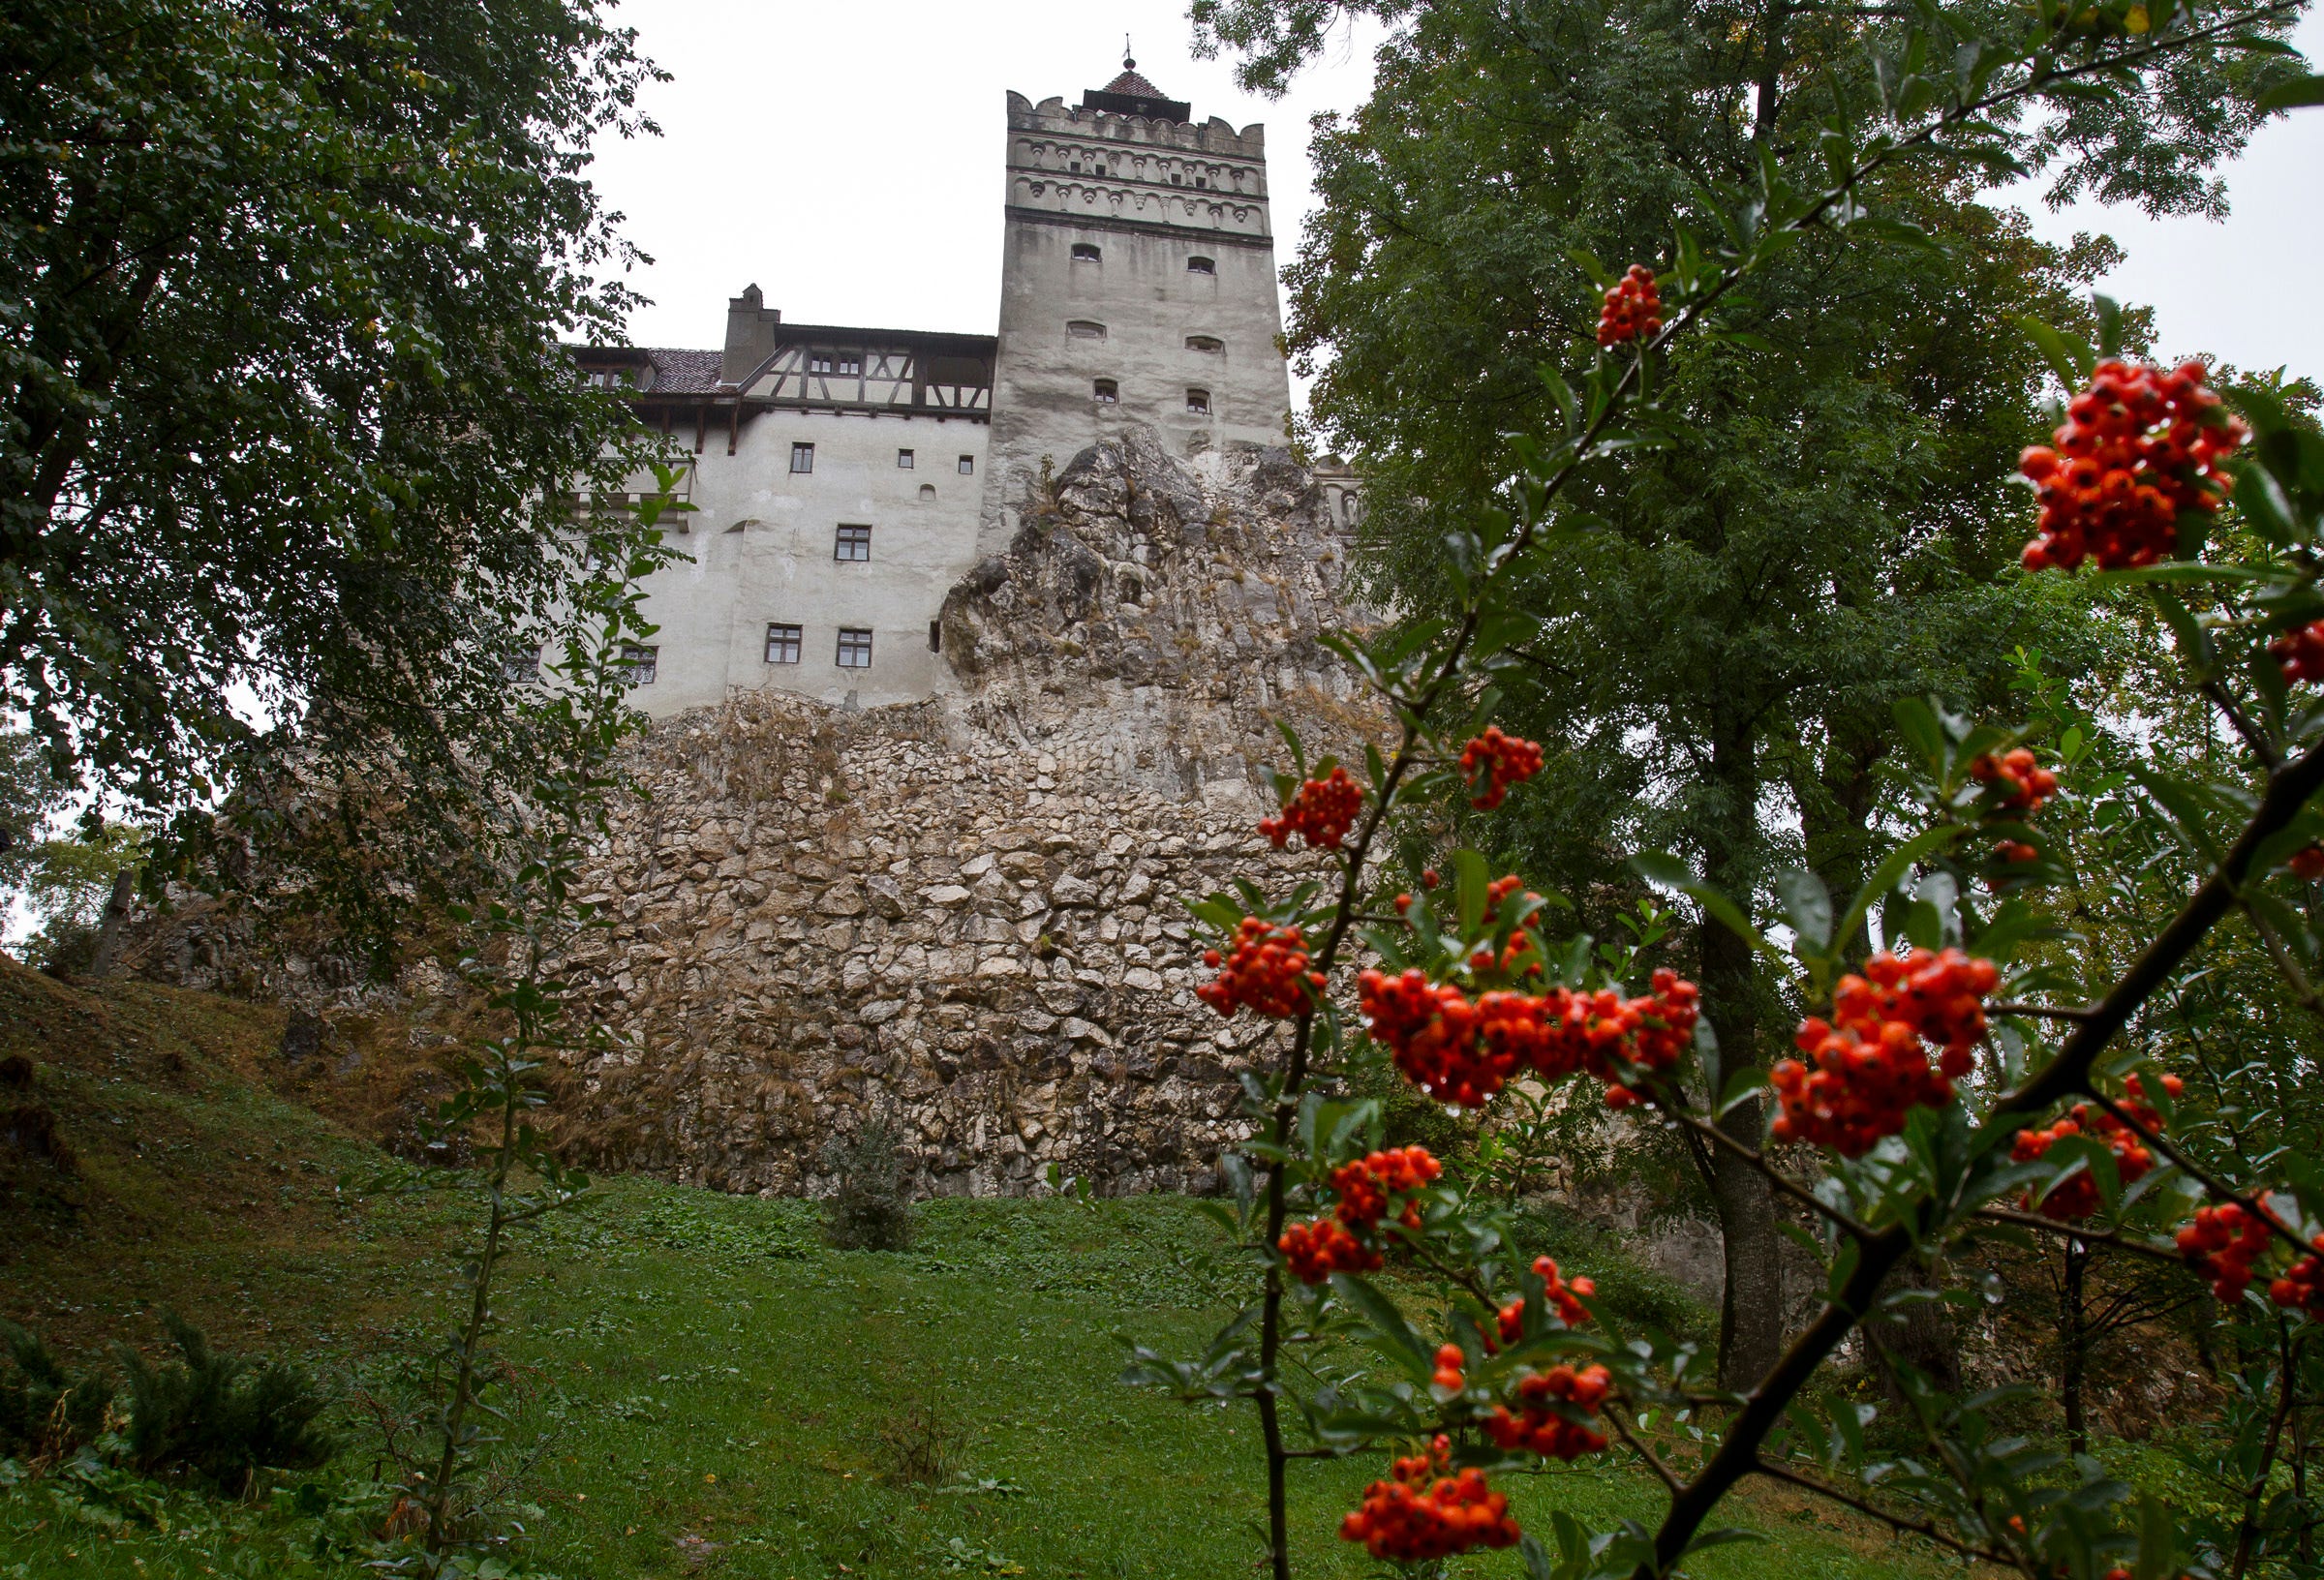 Dracula's castle proves an ideal setting for COVID-19 jabs 1